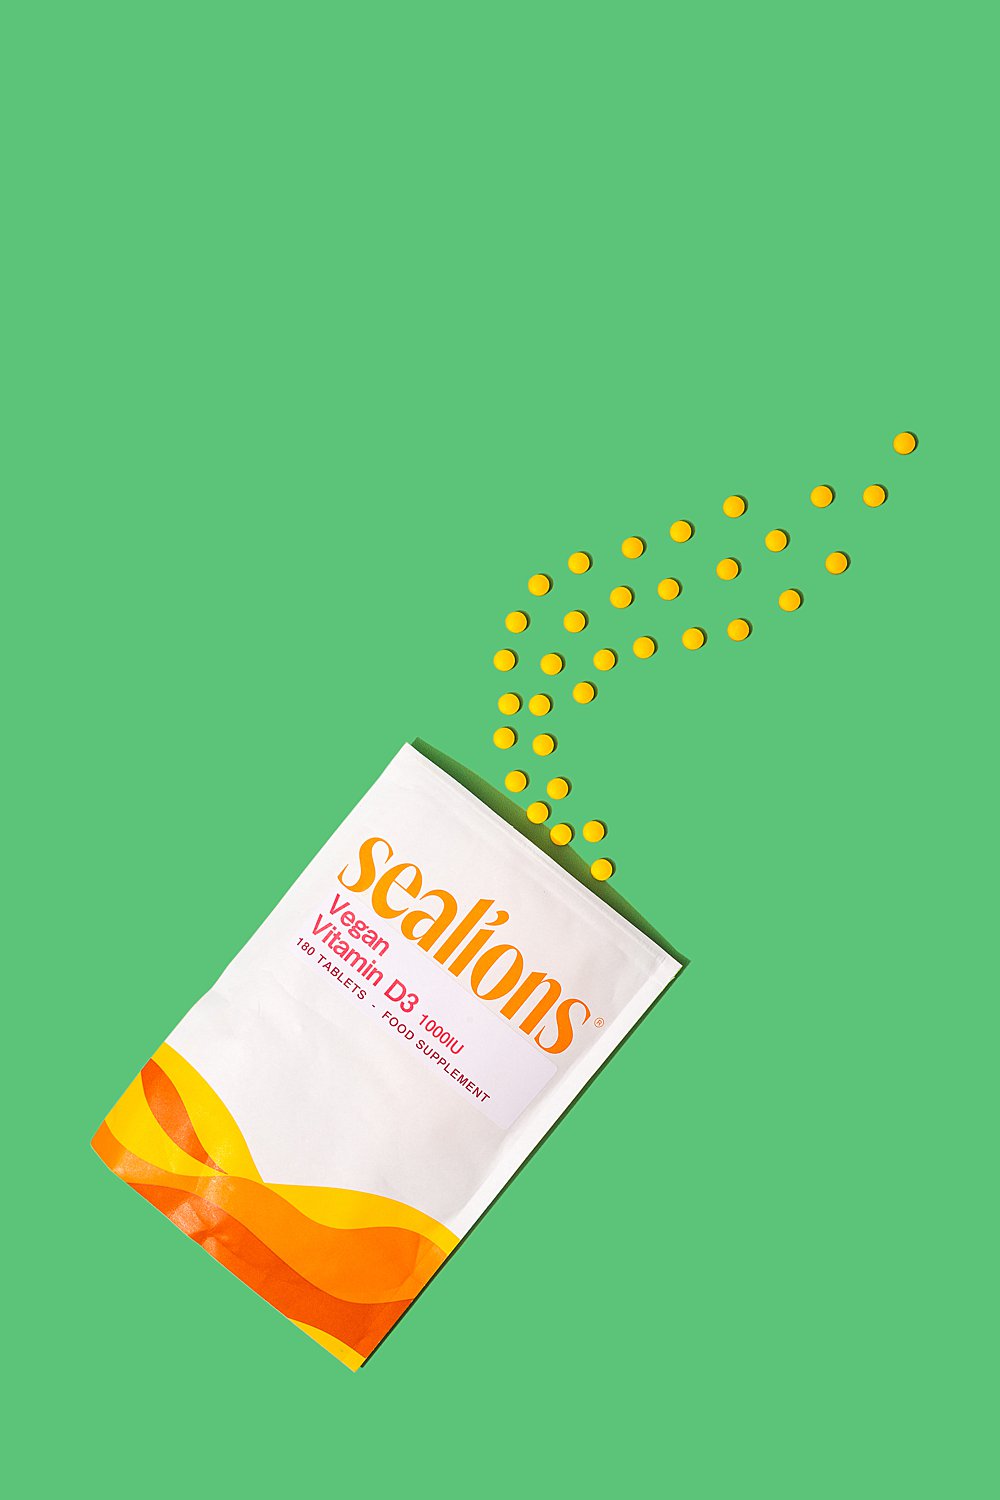 Colourful content creation for Sealions vitamin brand. Styled health product stills photography by Marianne Taylor.